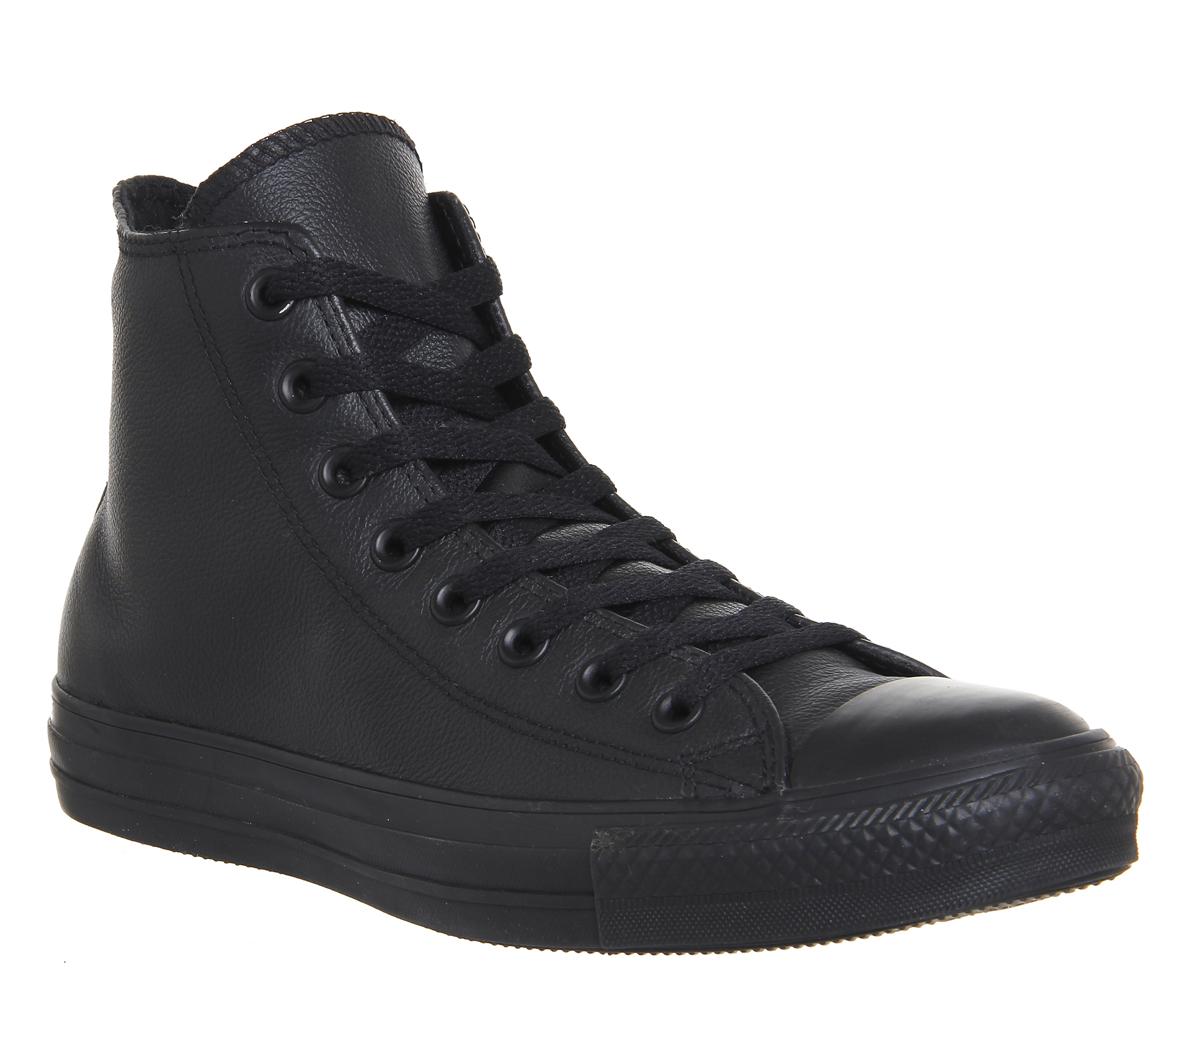 converse black leather high tops uk Off 